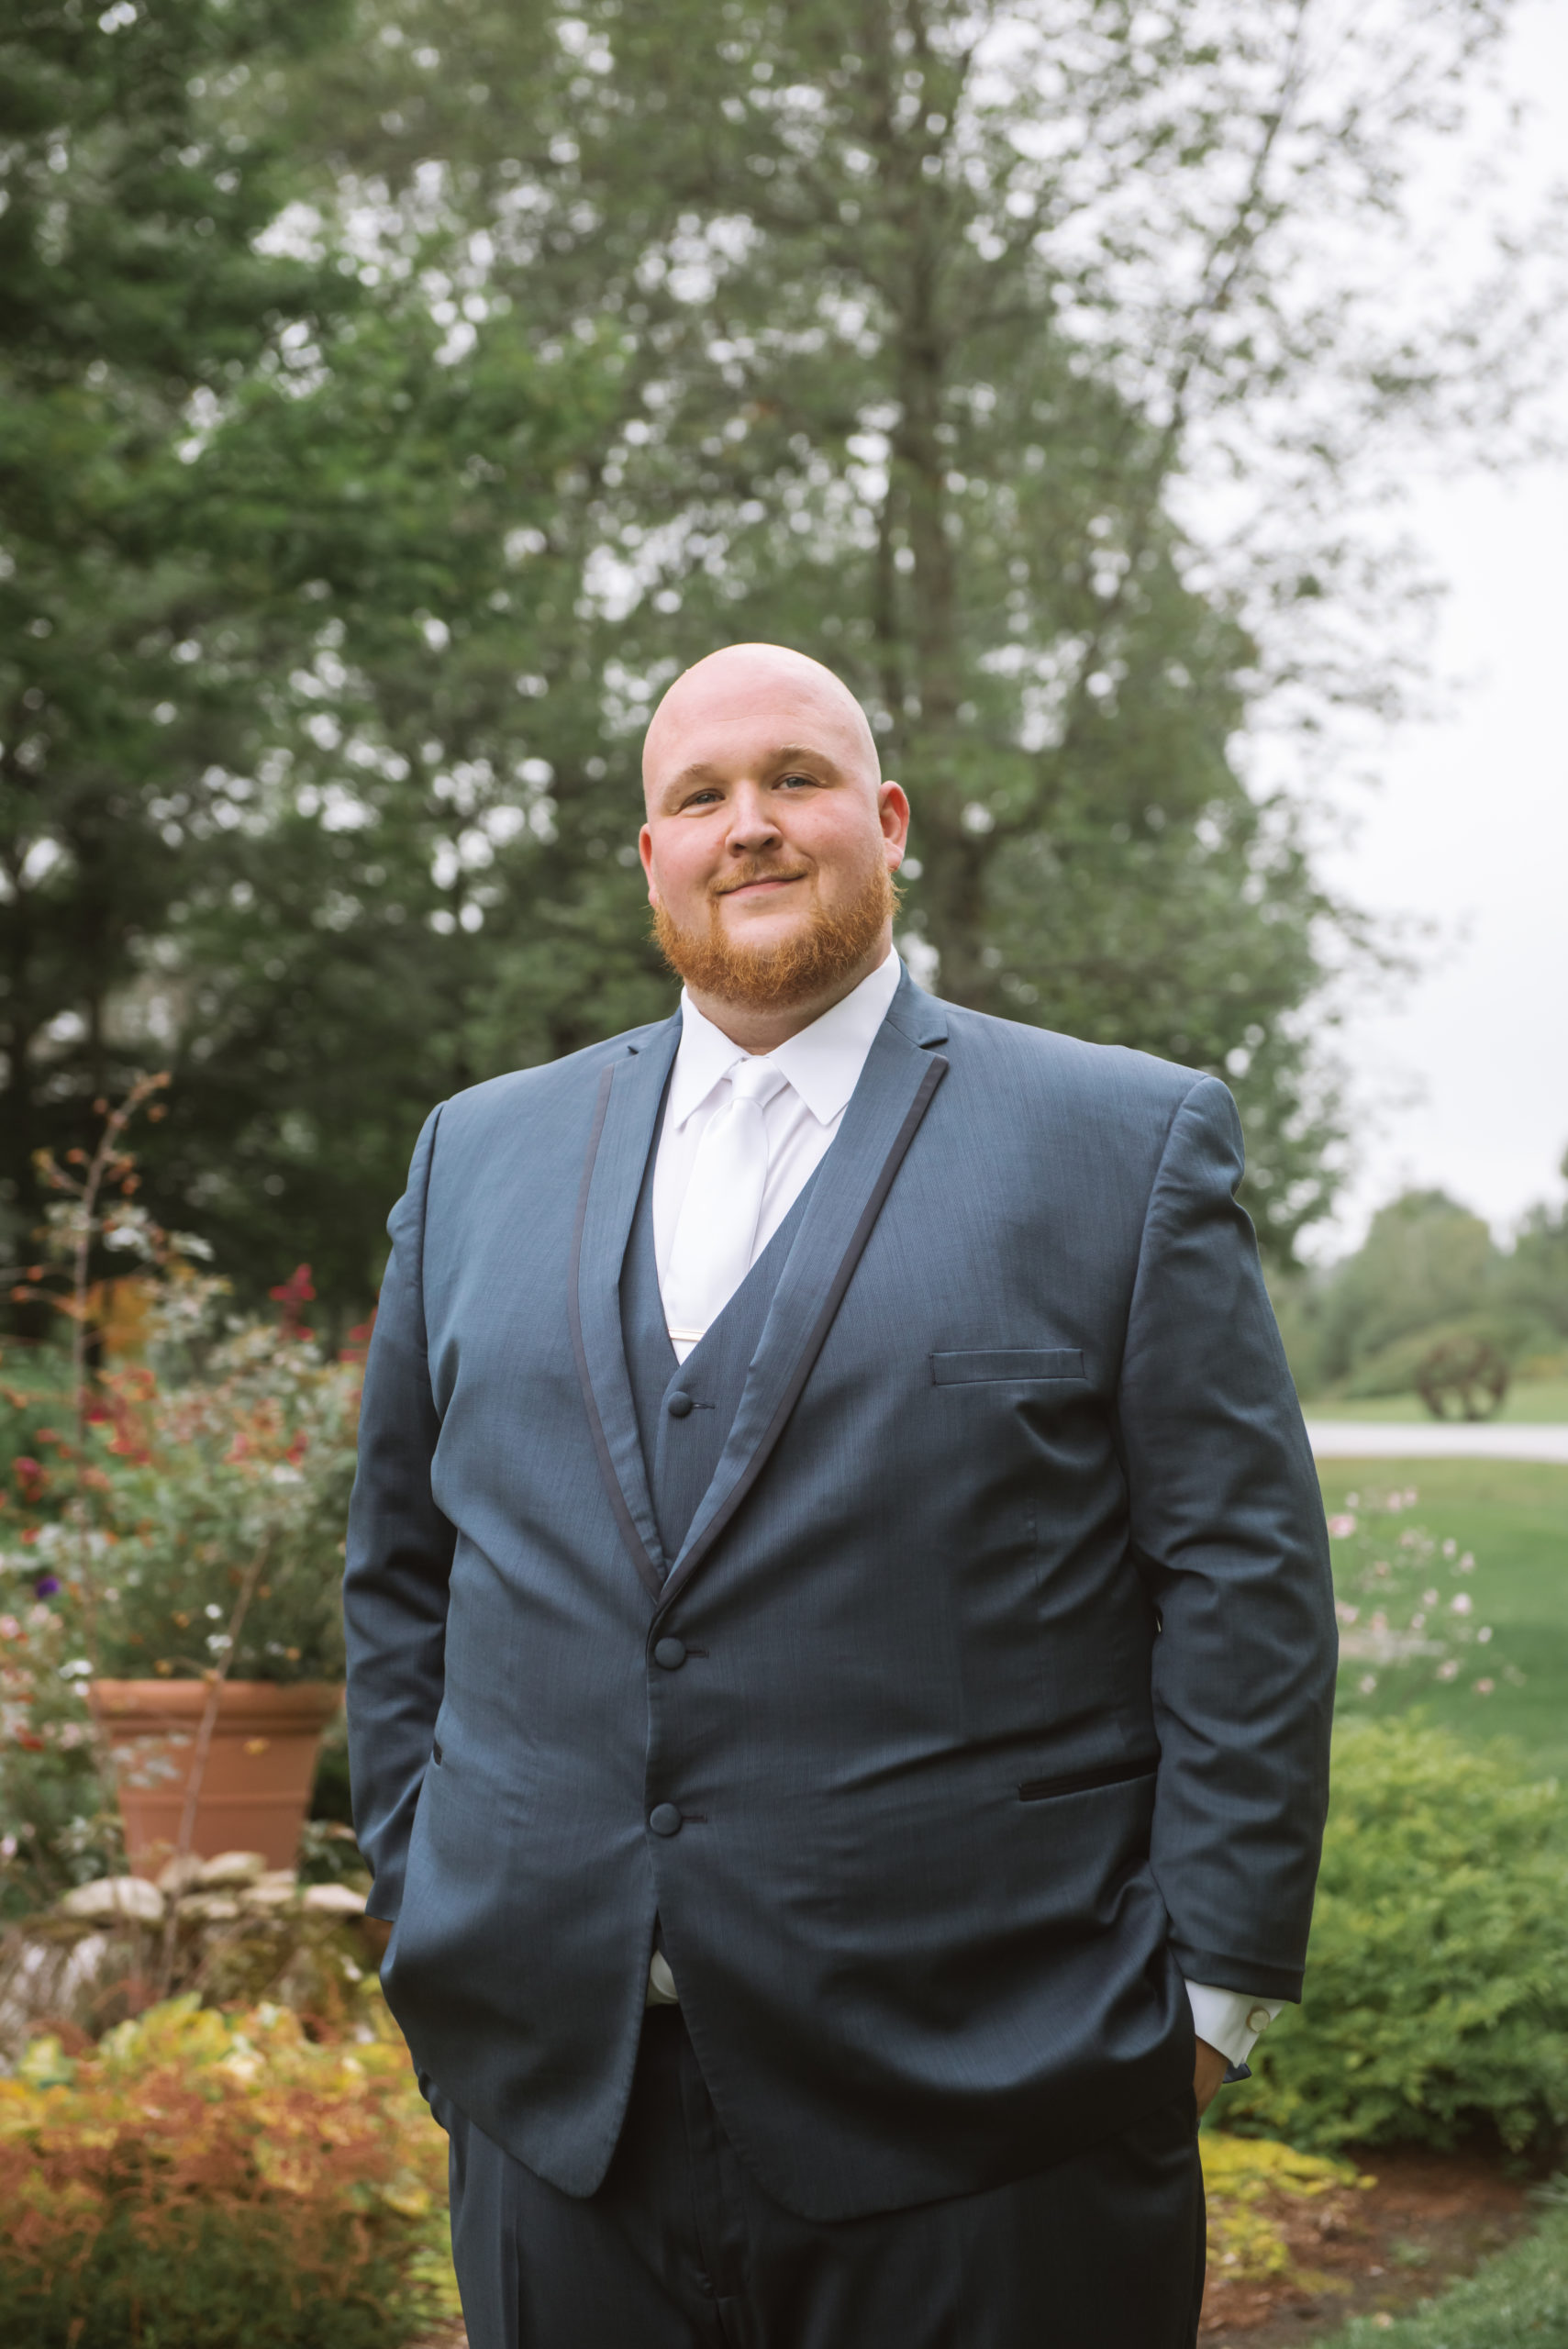 Torso portrait of the groom standing in a garden facing the camera and looking directly at the camera. He has a soft smile on his face. He is wearing a blue suit with a white tie. Both of his hands are in his pockets.